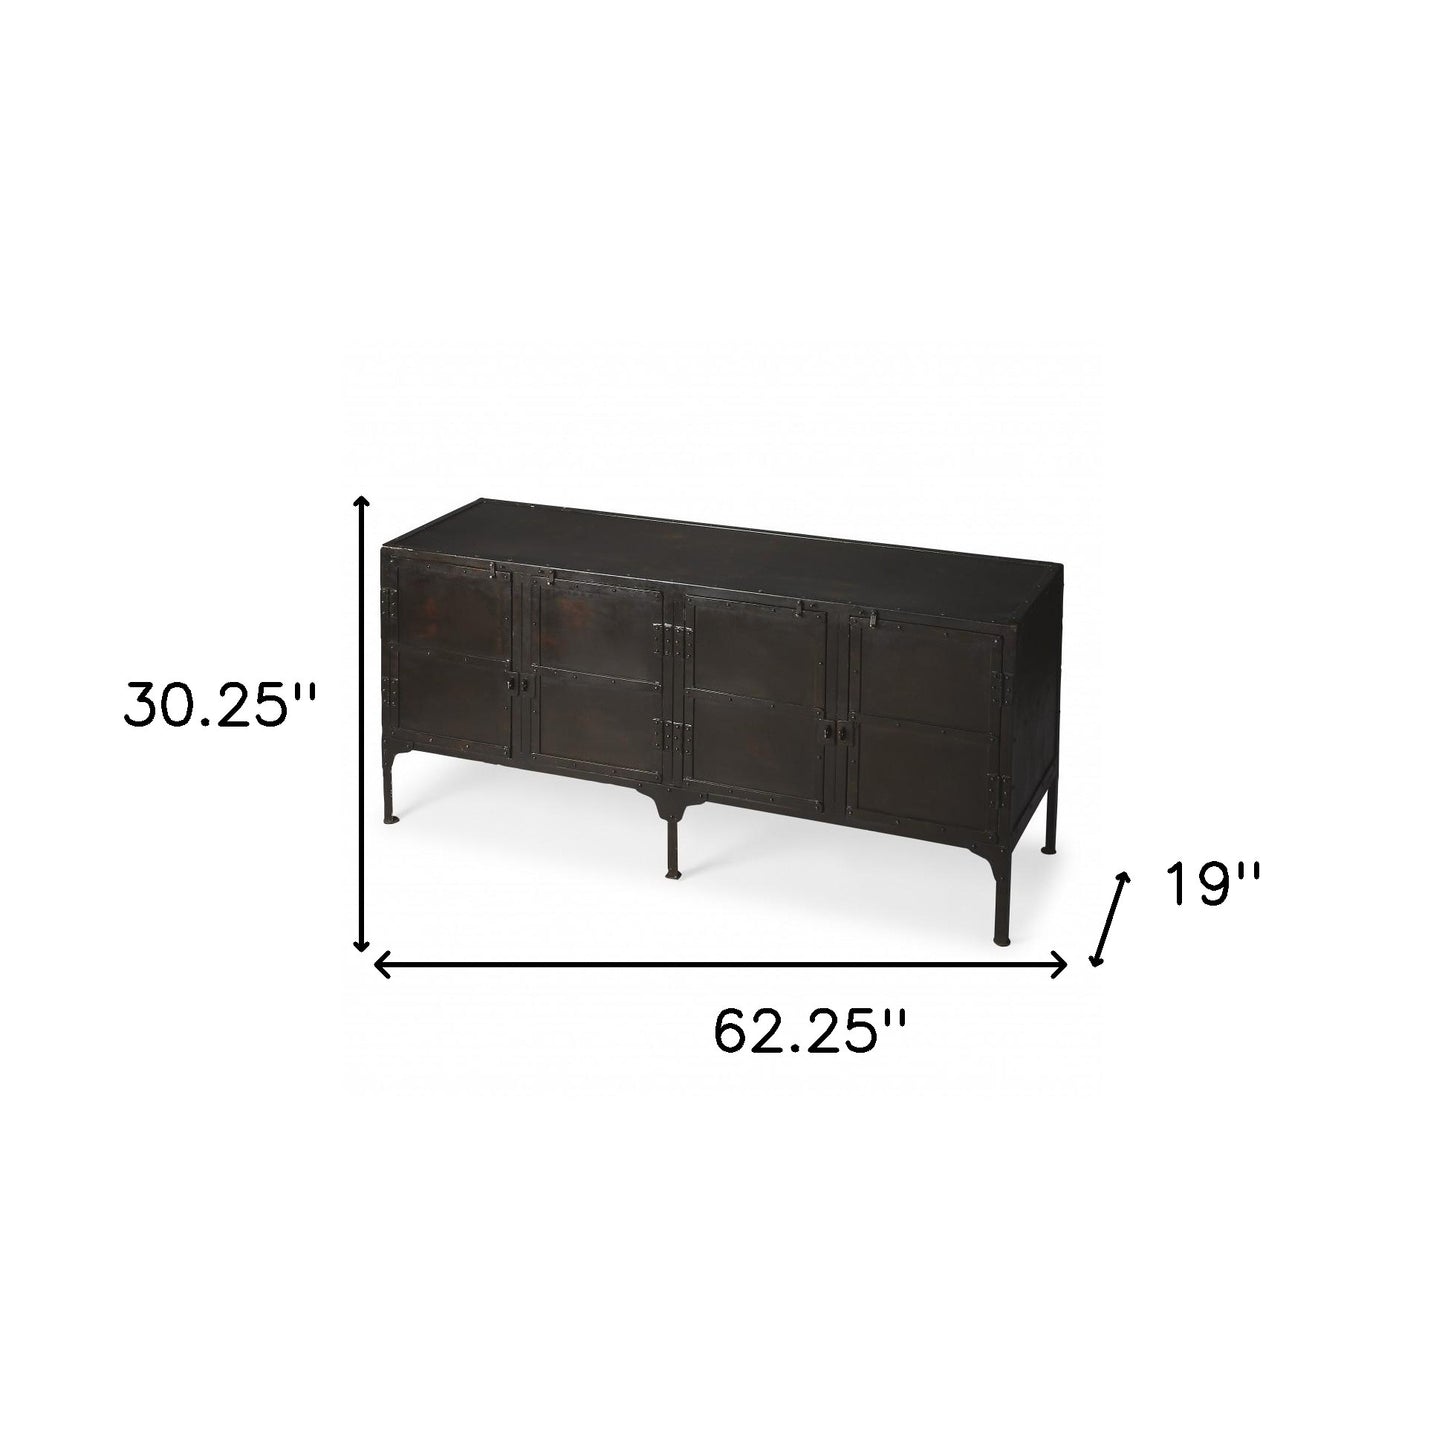 Owen Industrial Chic Console Cabinet